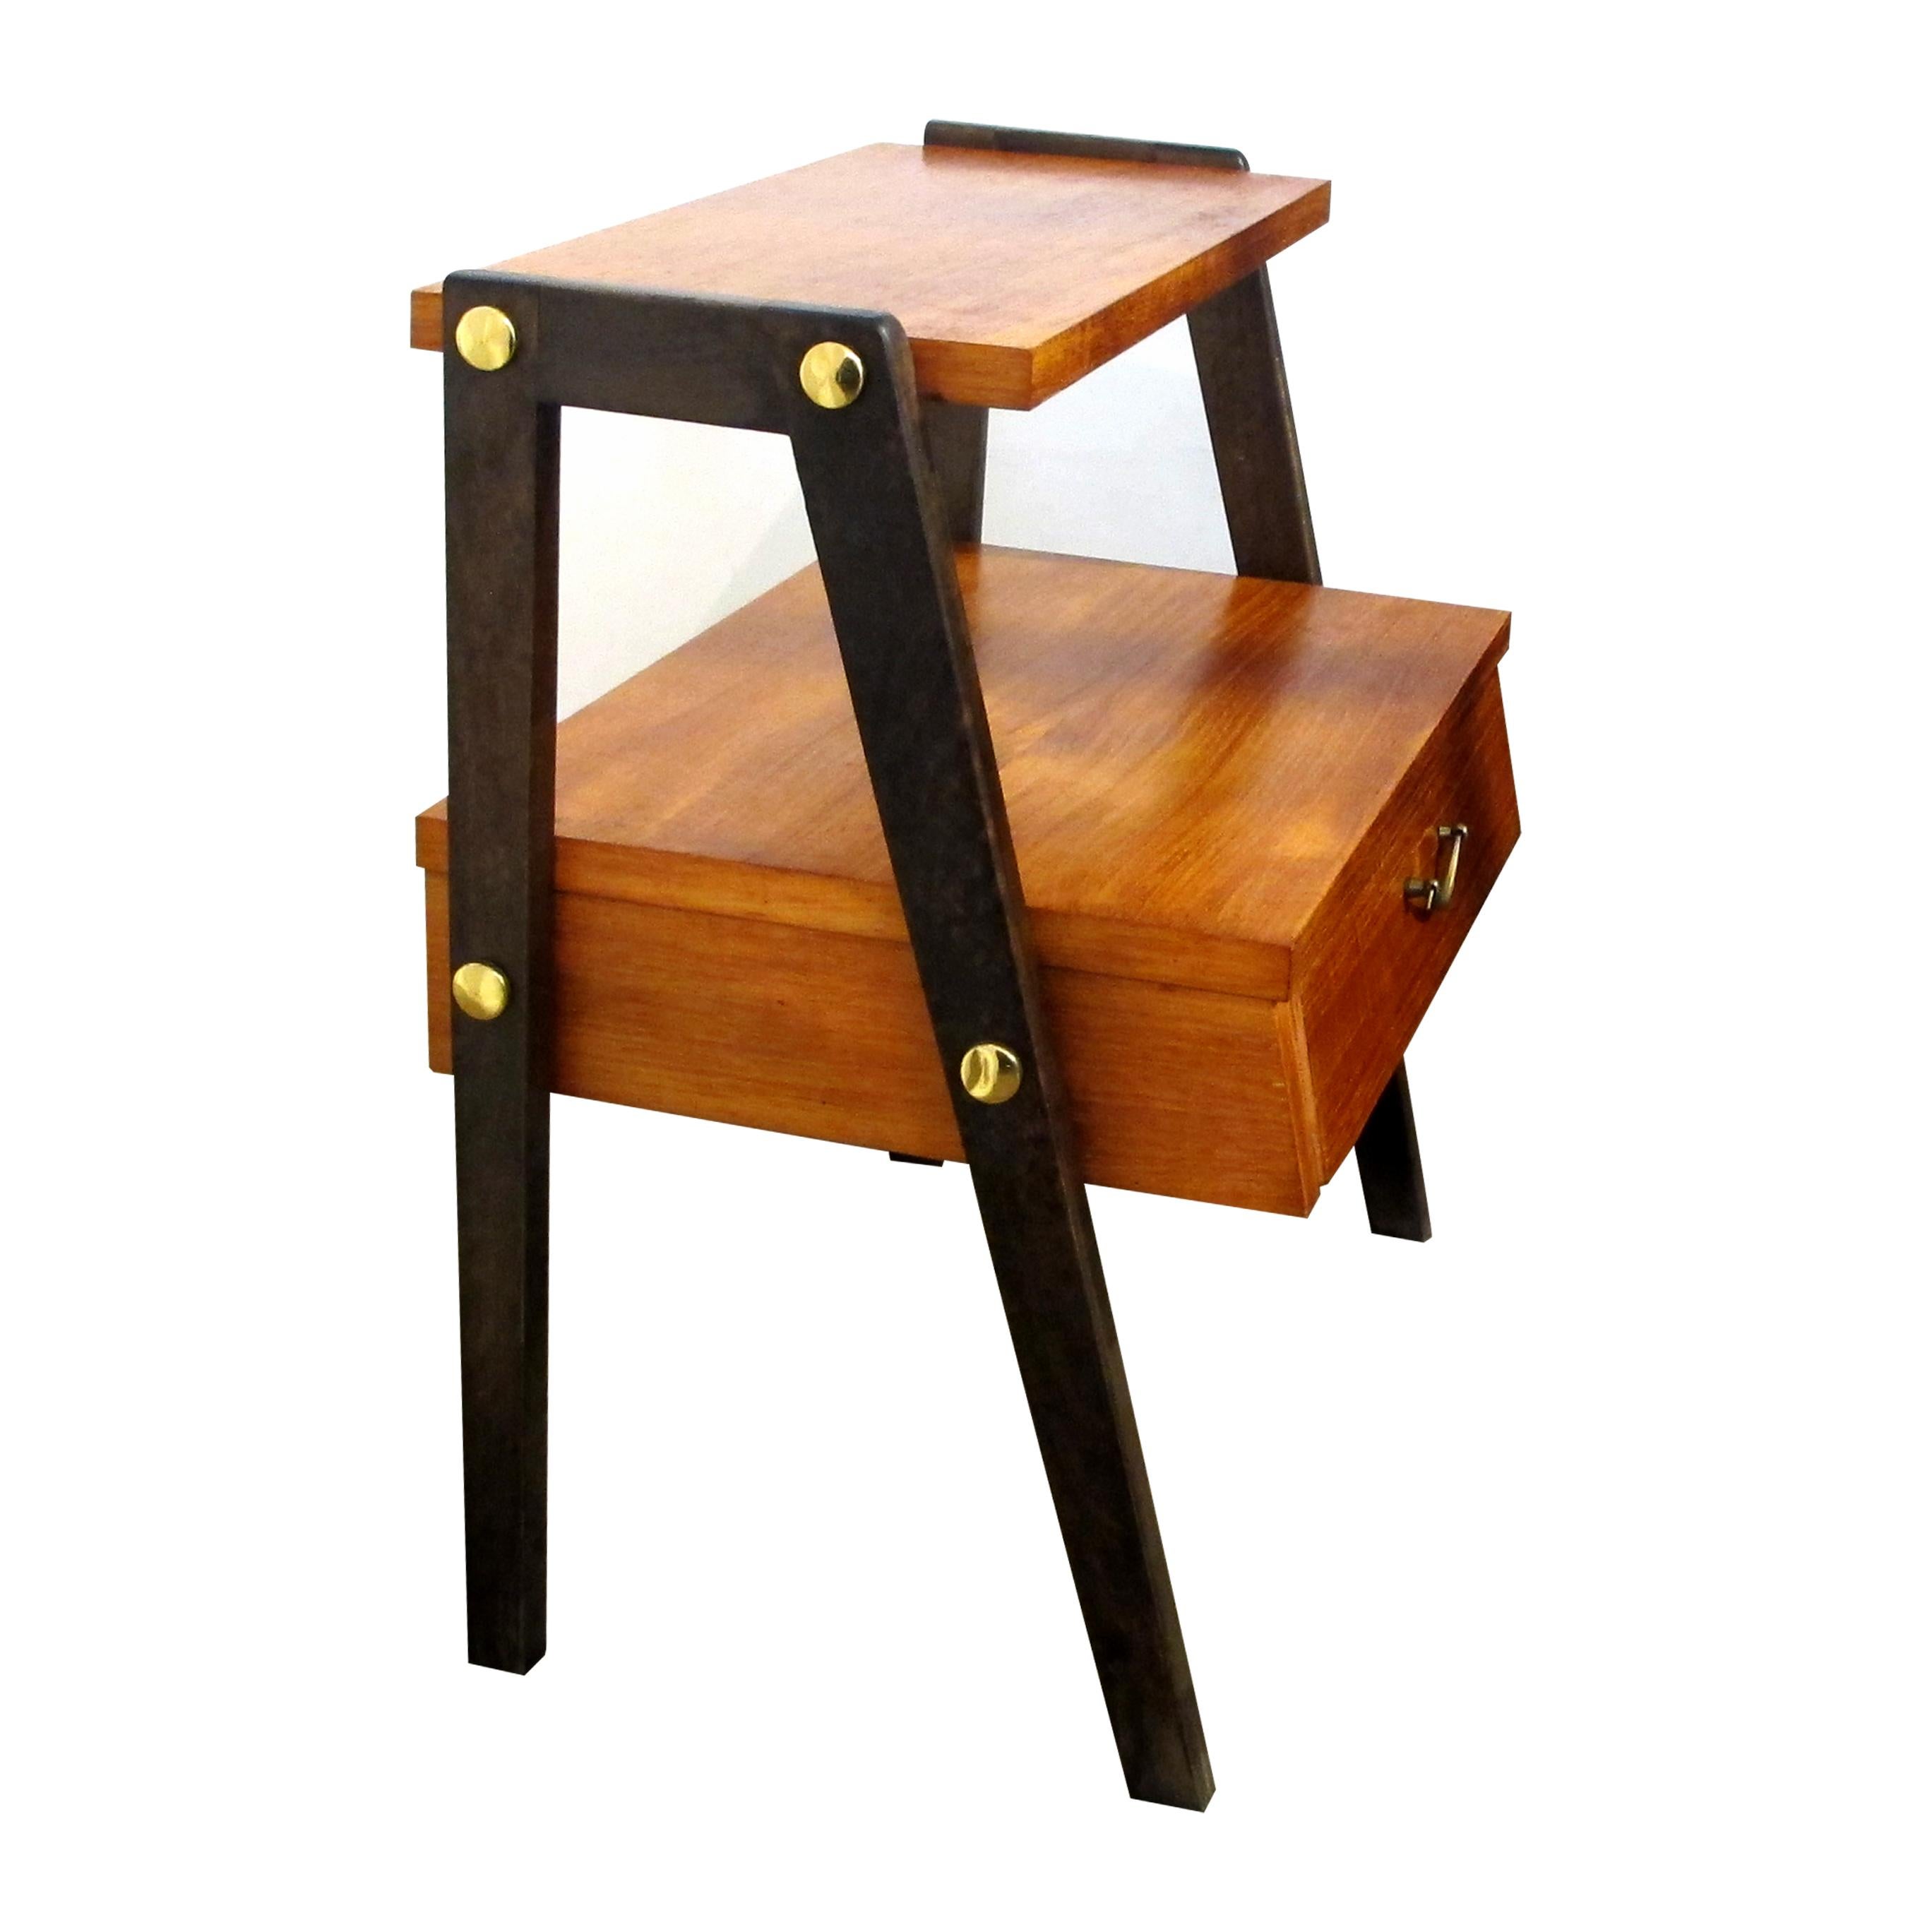 Pair of compact Scandinavian two-tier teak bedside tables, 1950s. These nightstands are ideal for small spaces, each table has one drawer and two shelves. The tables are presented on darker brown painted legs creating an elegant contrast to the